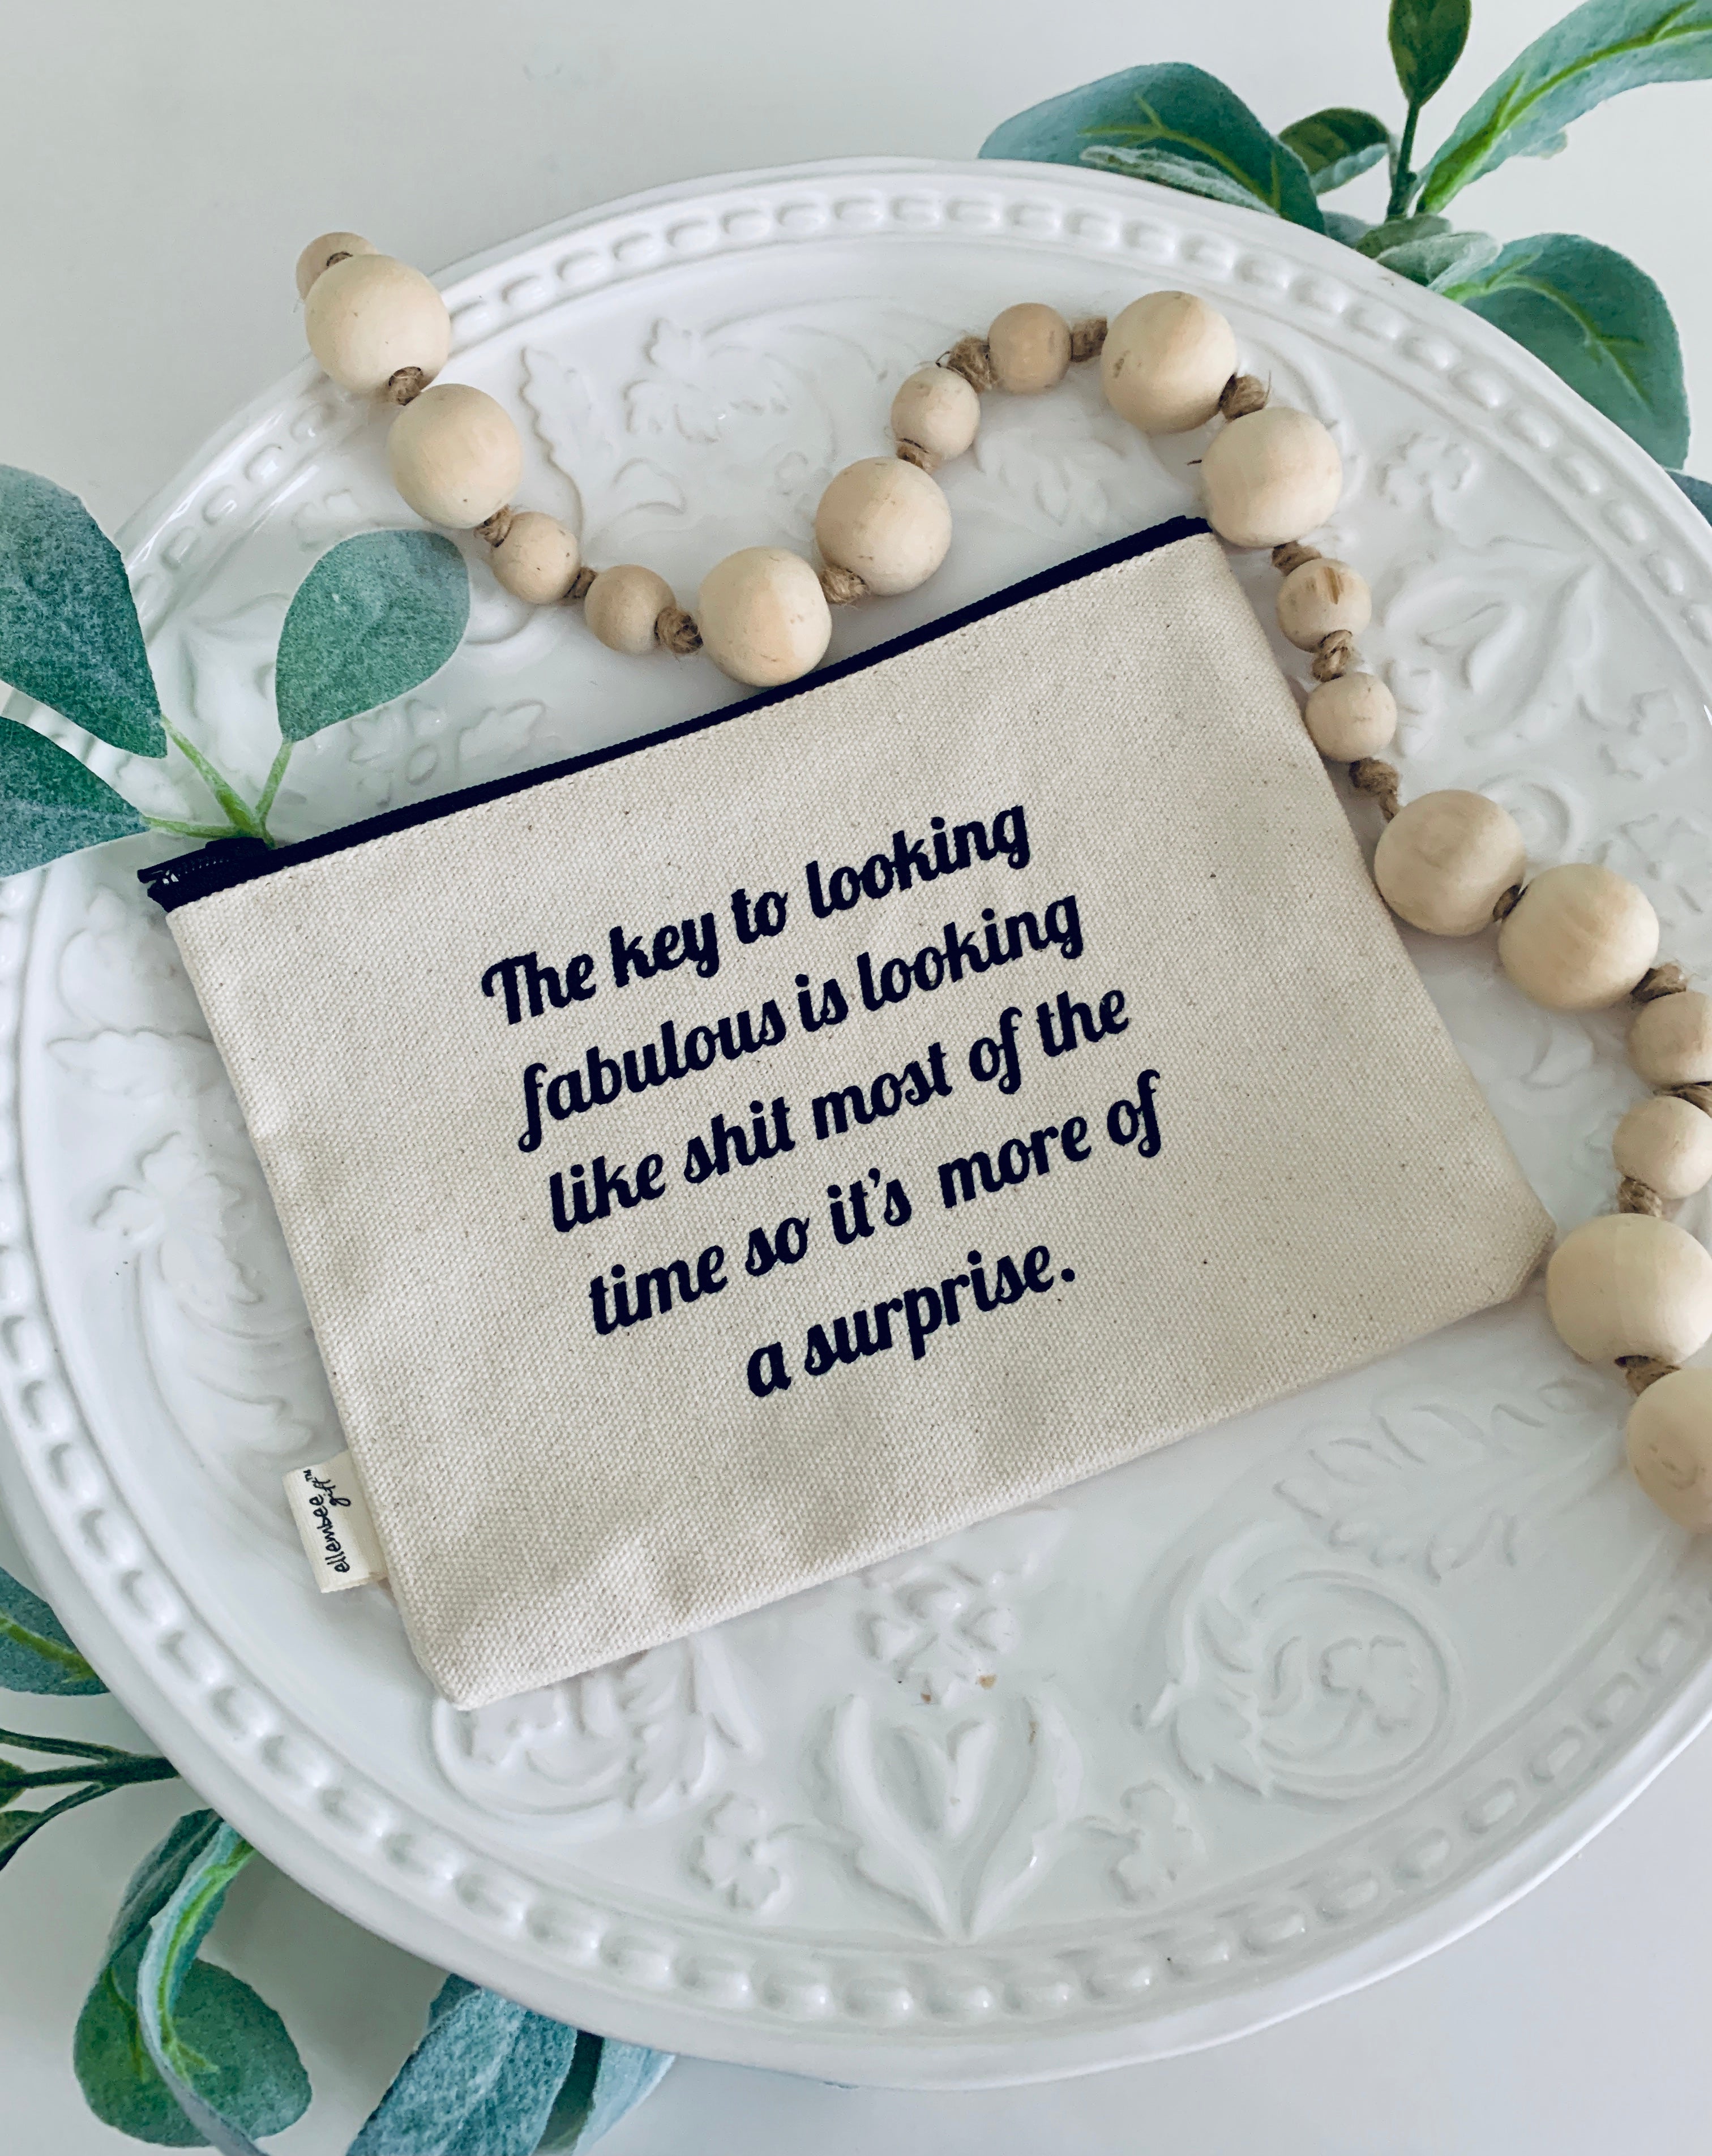 The key to looking fabulous is looking like shit most of the time so it's more of a surprise zipper pouch